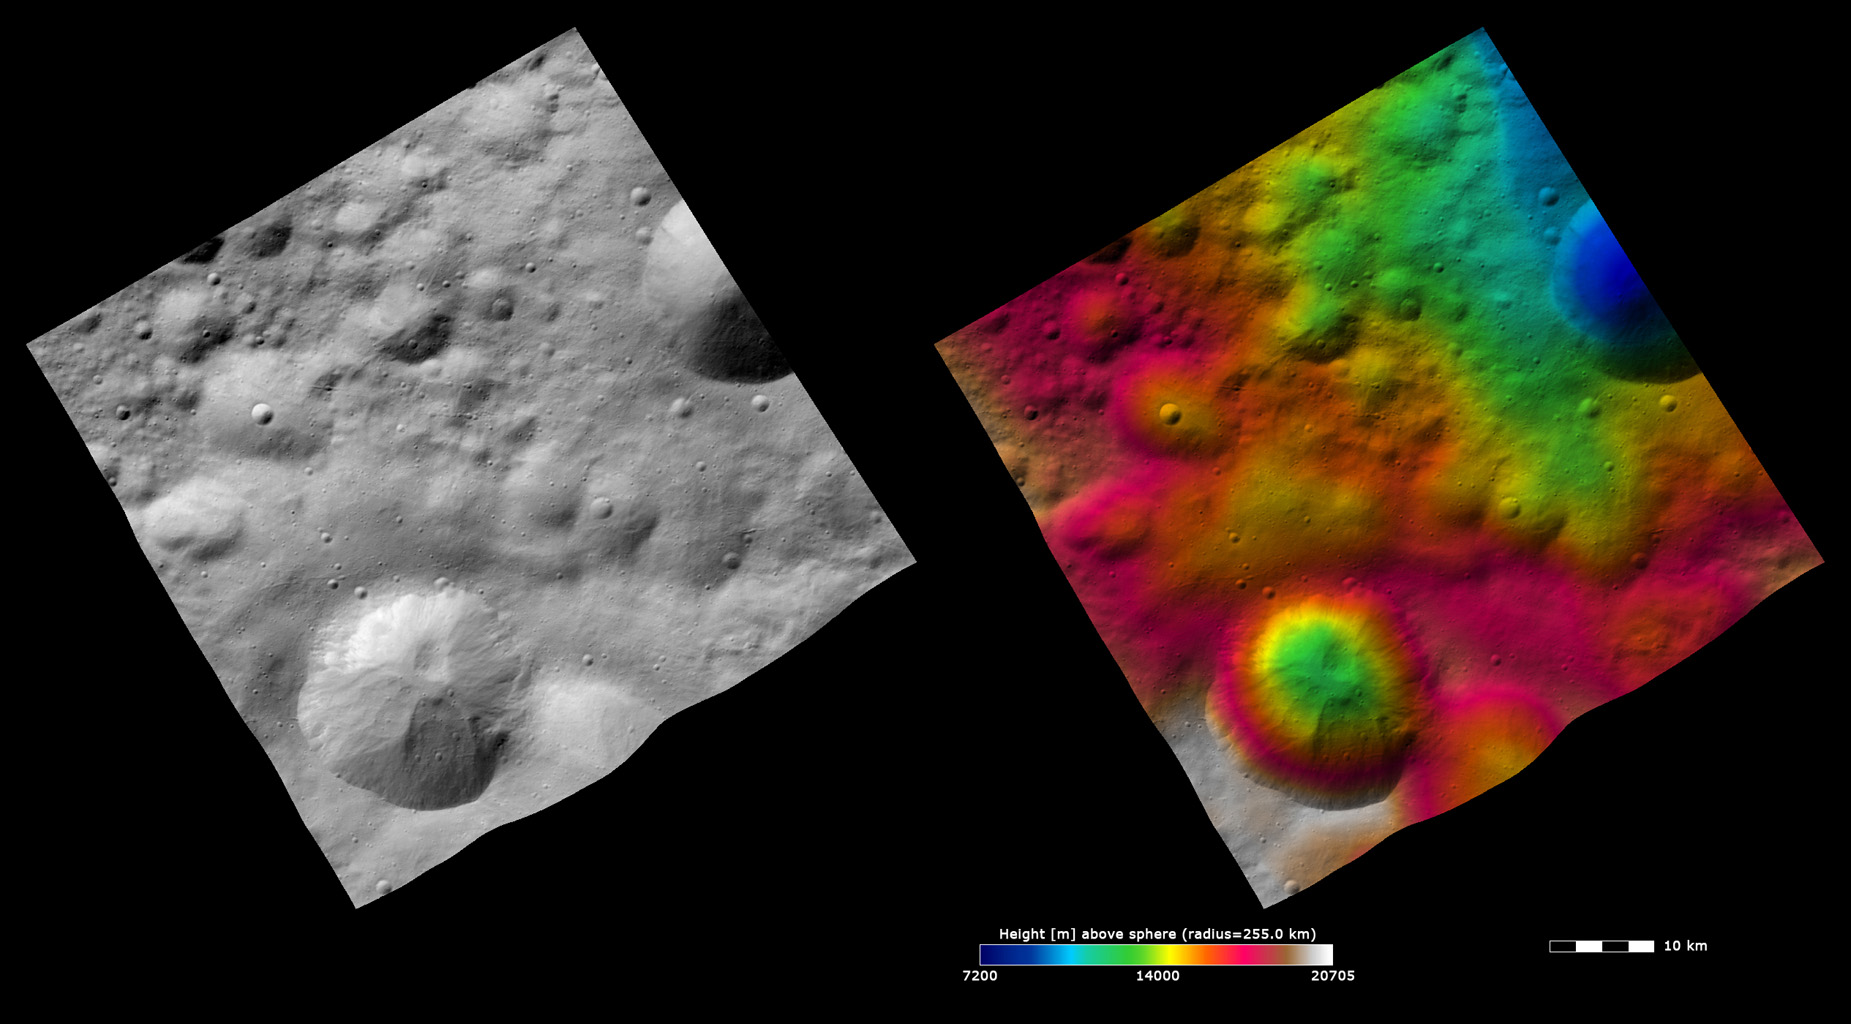 Topography and Albedo Image of Gegania Crater